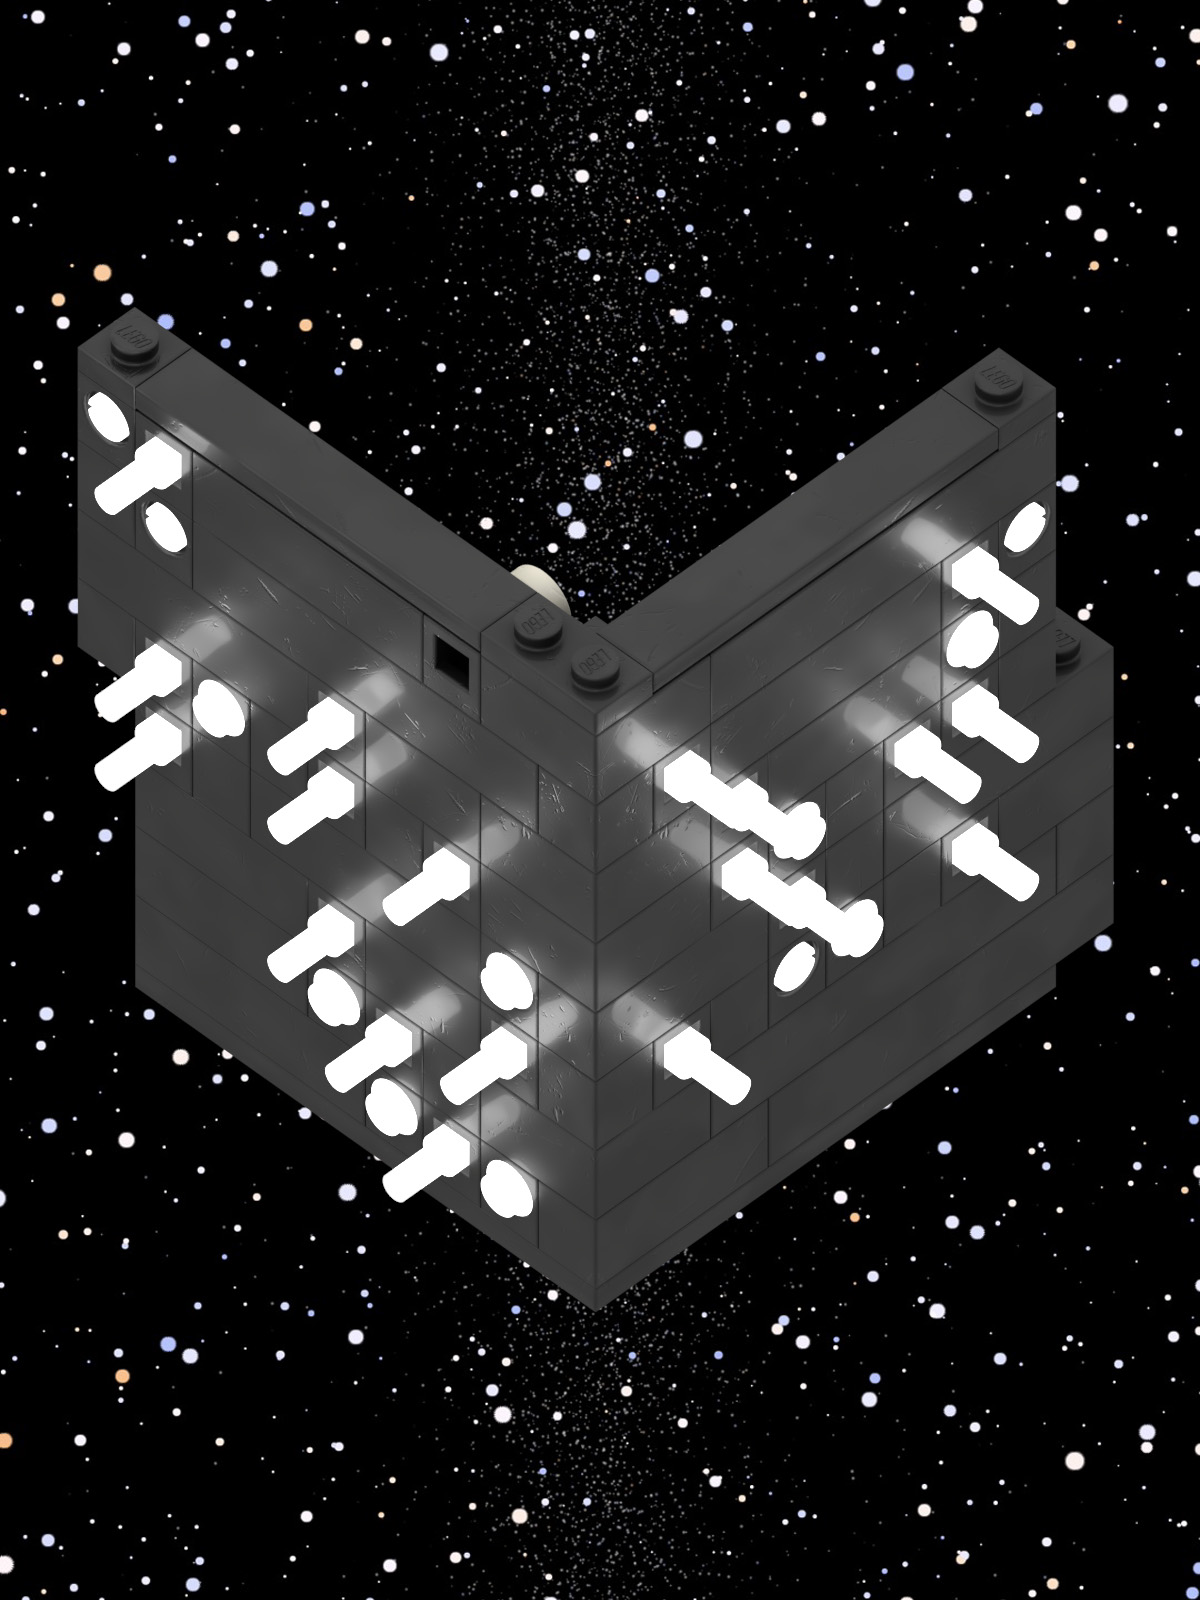 Rear view of black habitat with tens of illuminated Technic elements sticking out.